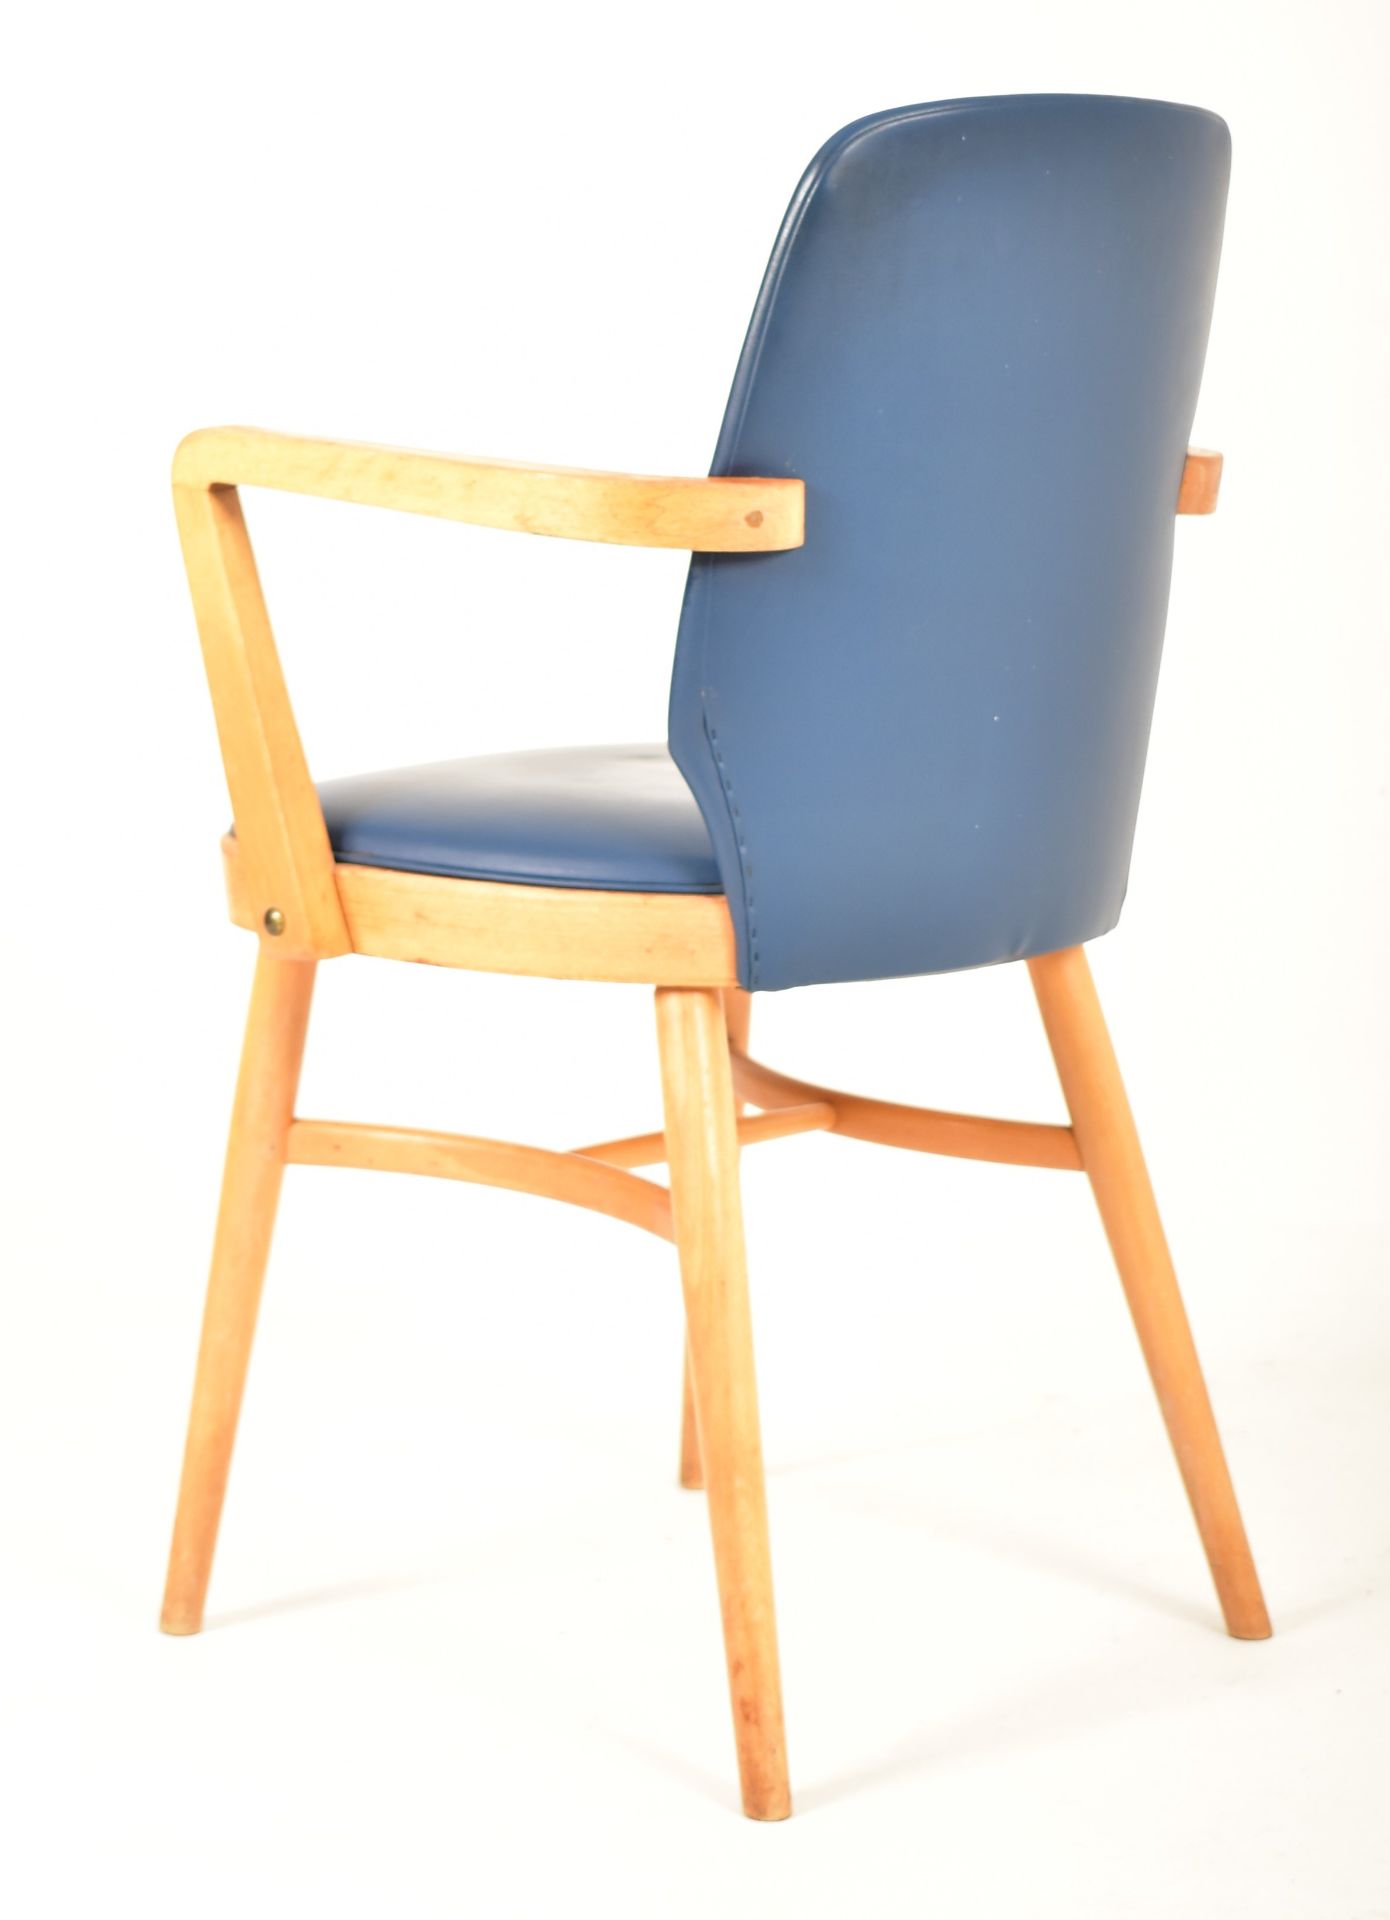 BEN CHAIRS - SET OF THREE RETRO BEECH FRAMED DINING CHAIRS - Image 6 of 7